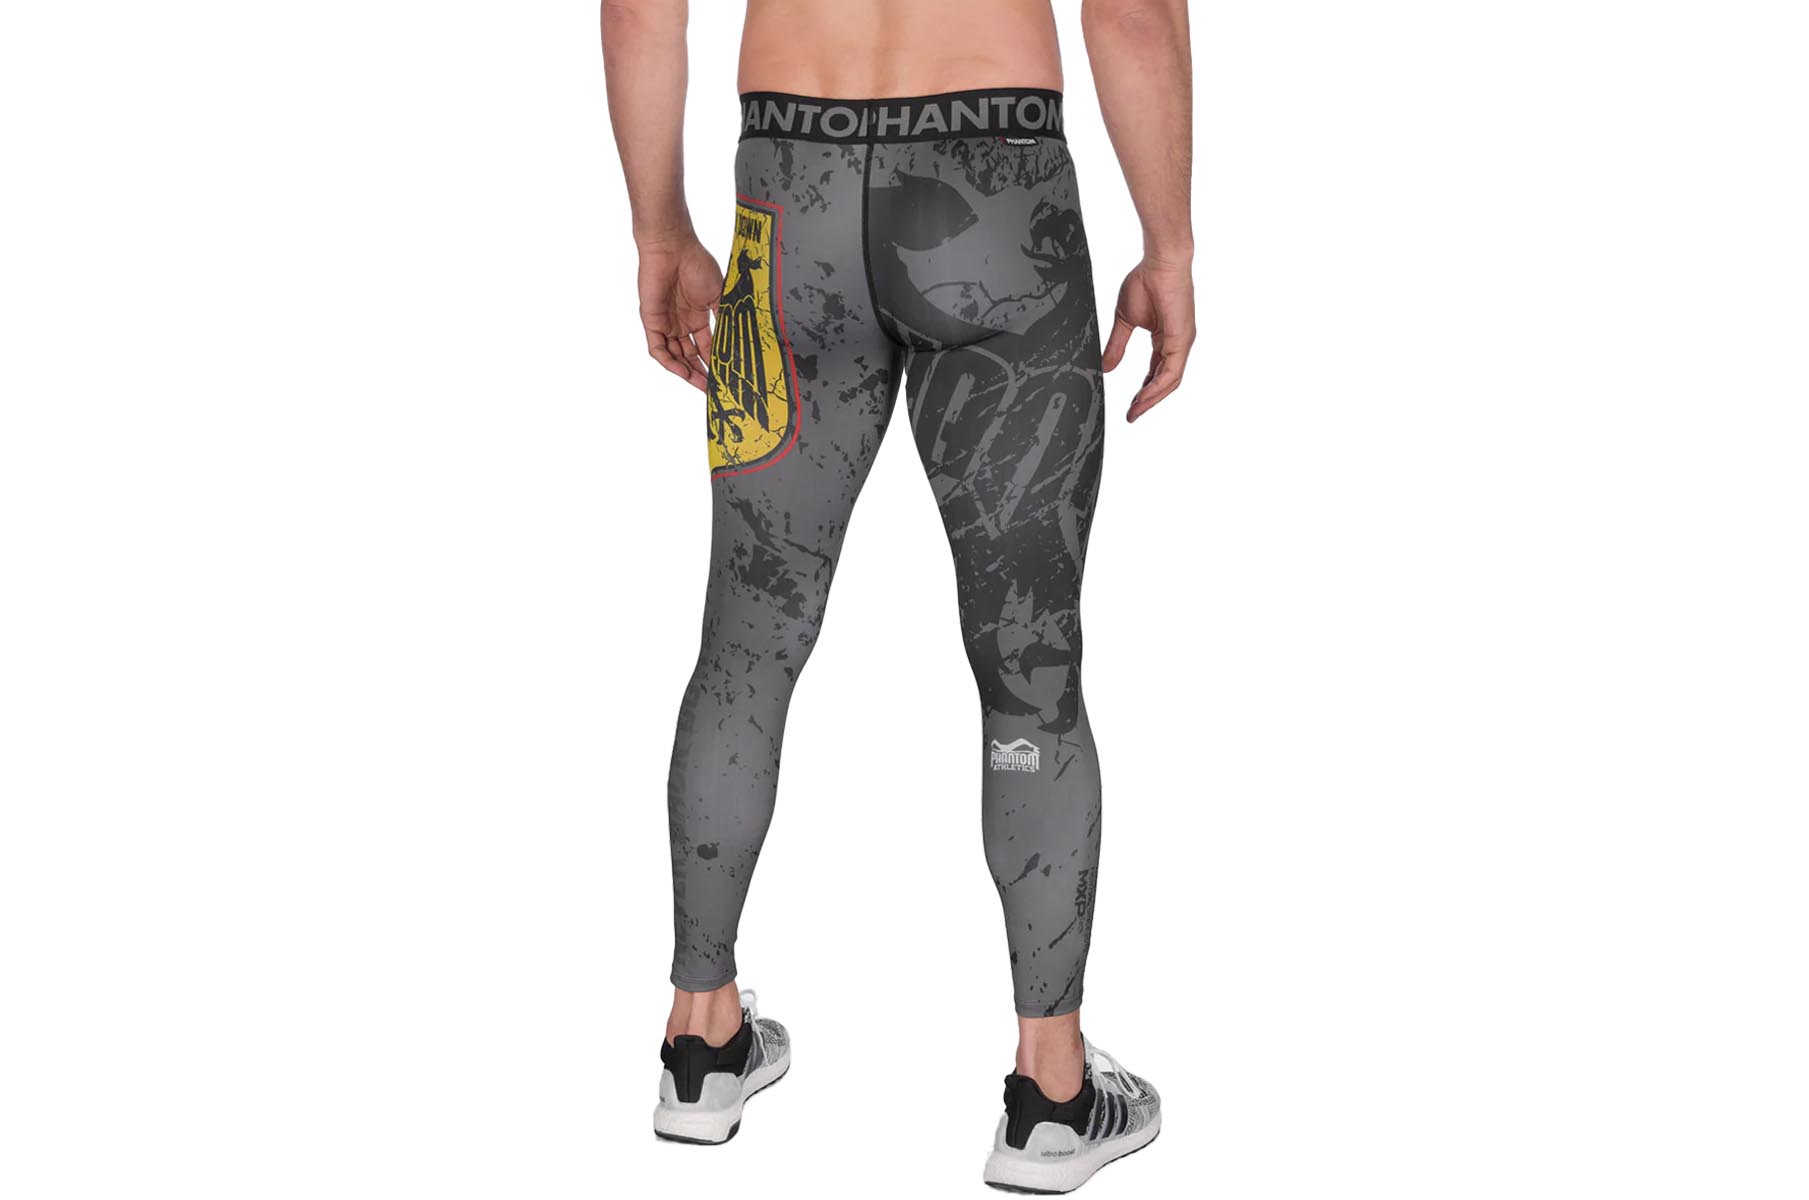 SALE] Under Armour compression yoga exercise leggings for women